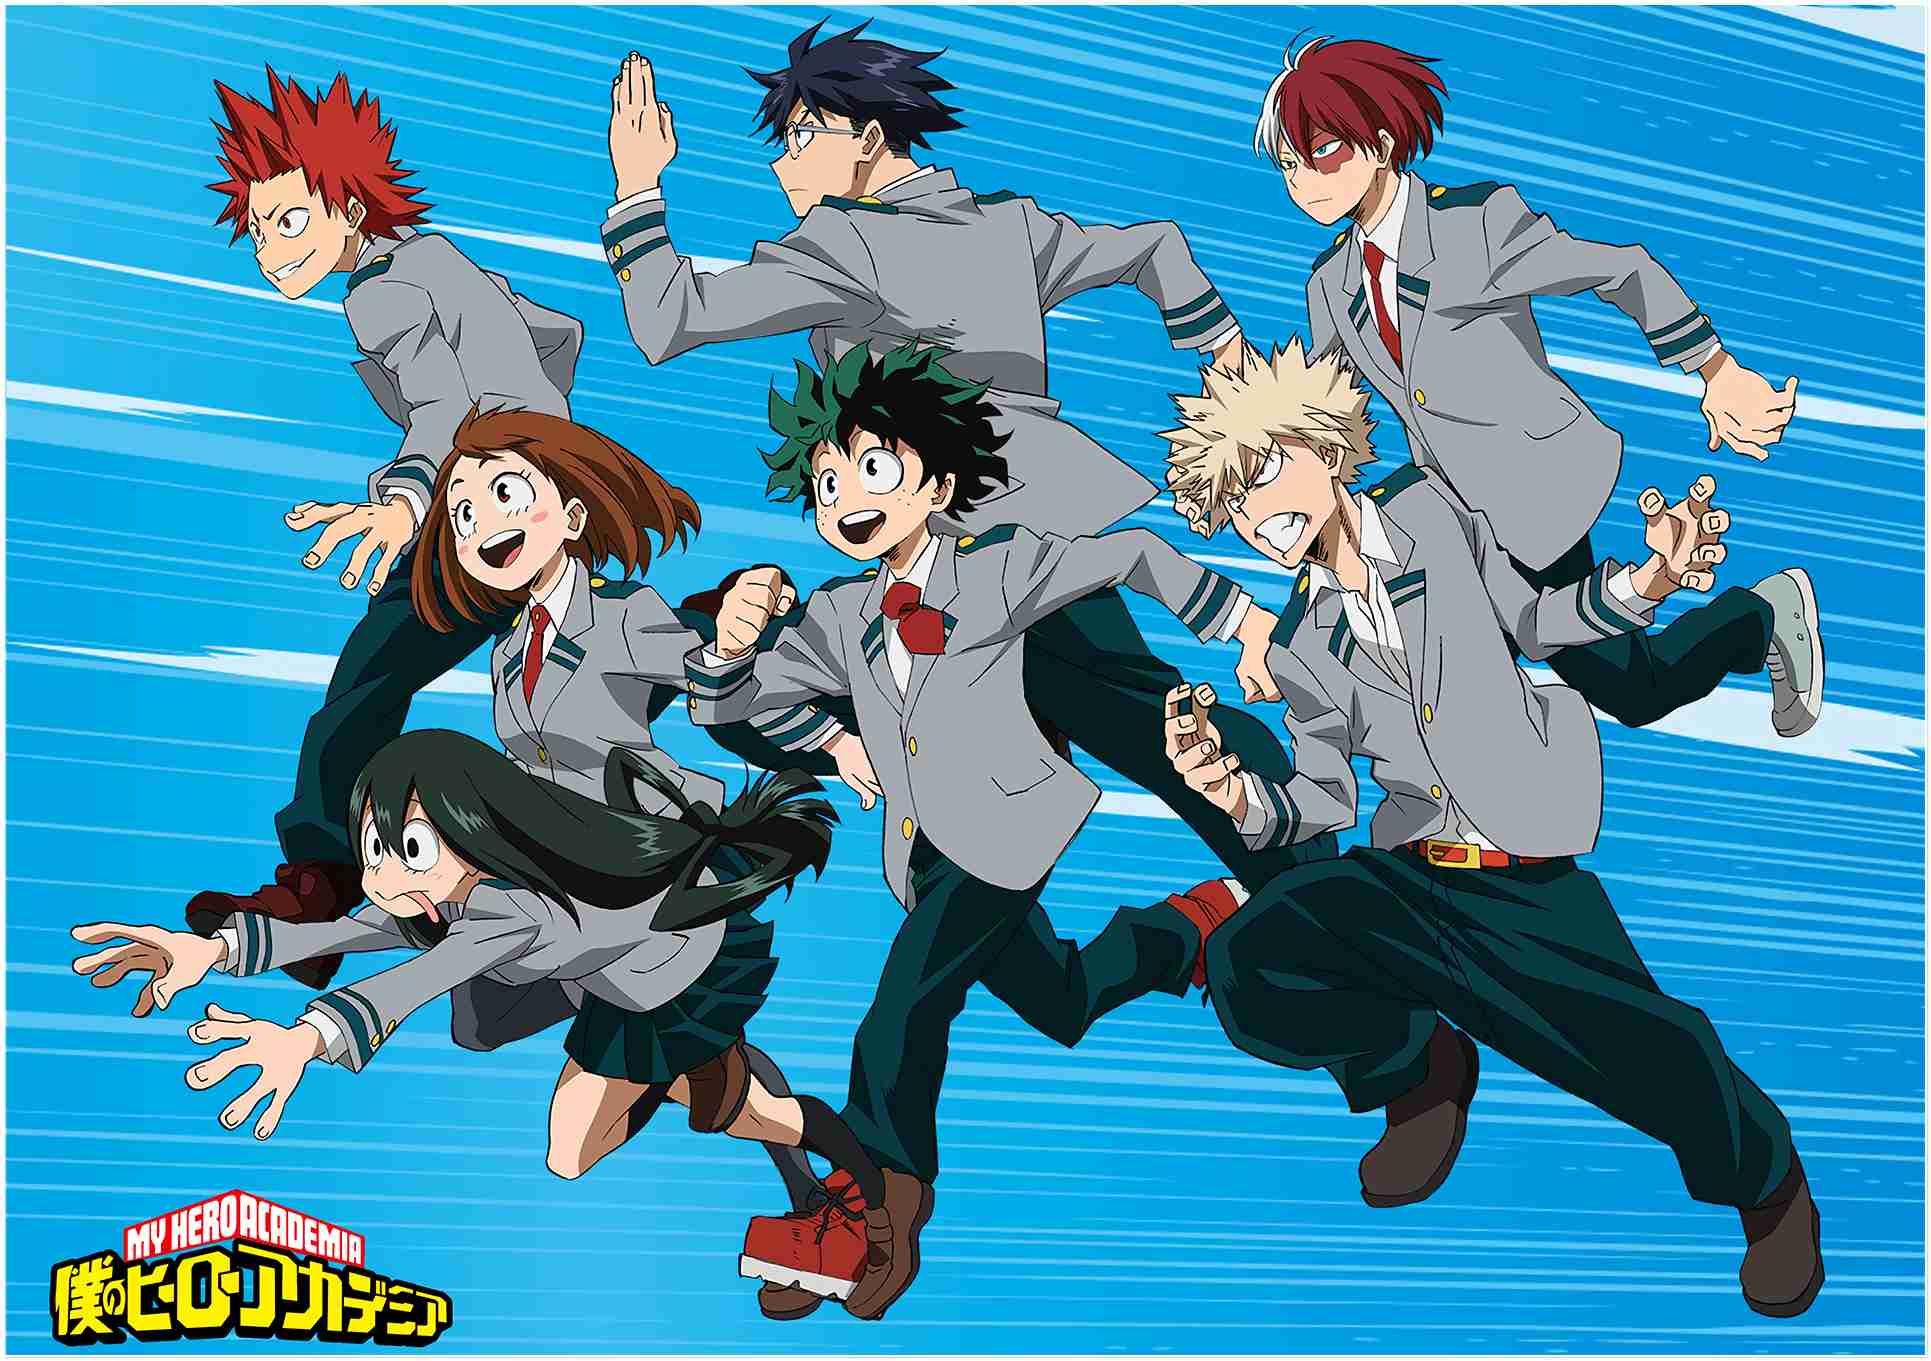 The Best My Hero Academia Wallpapers Beautiful Collection - Anime Ua High School Uniform , HD Wallpaper & Backgrounds